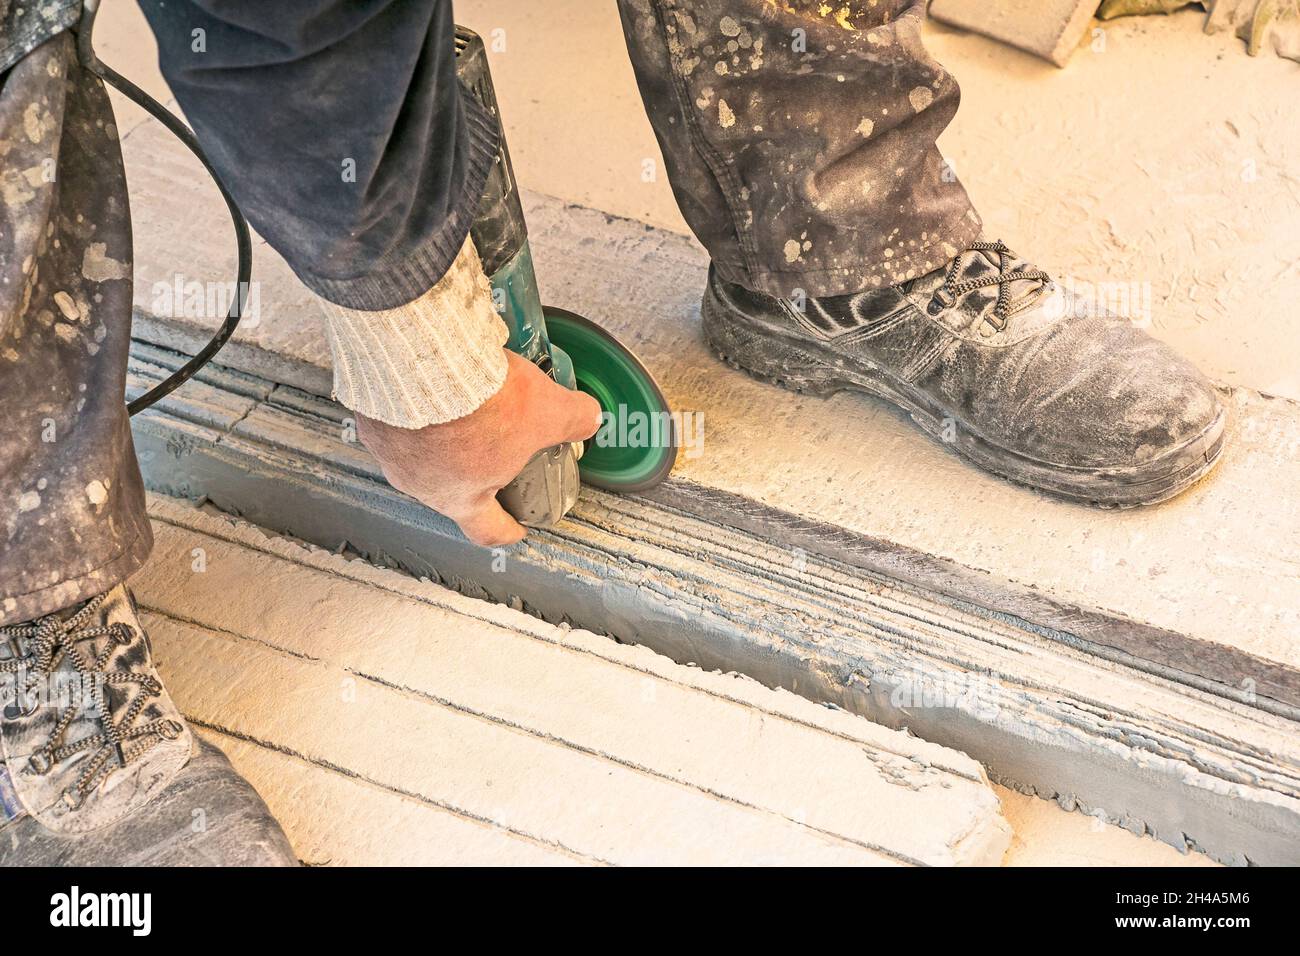 A man polishes a granite slab with a grinder. Work on stone with an angle grinder. A worker polishes a white stone. Stock Photo